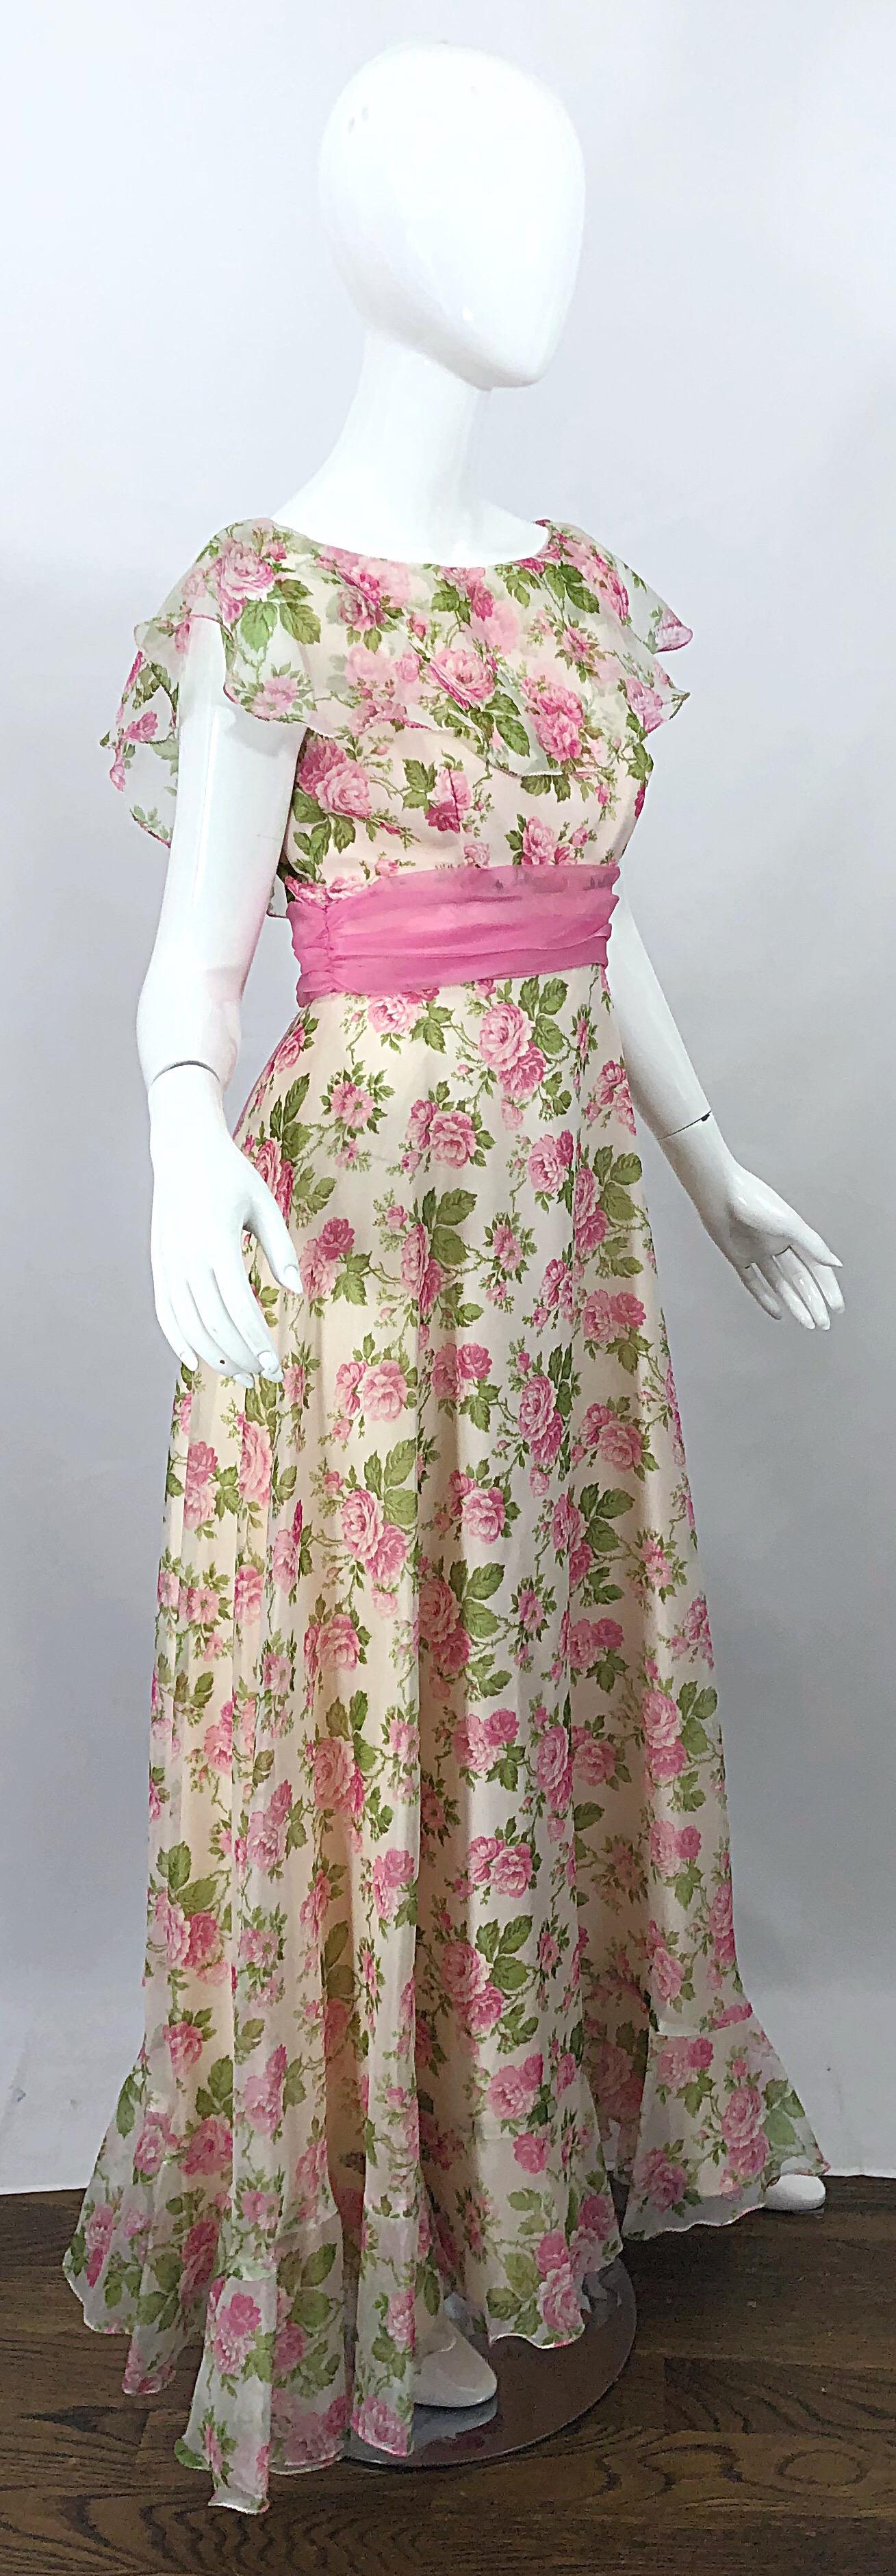 Sylvia Ann 1970s Rose Print Pink Ivory Chiffon Vintage 70s Maxi Dress Gown For Sale 3